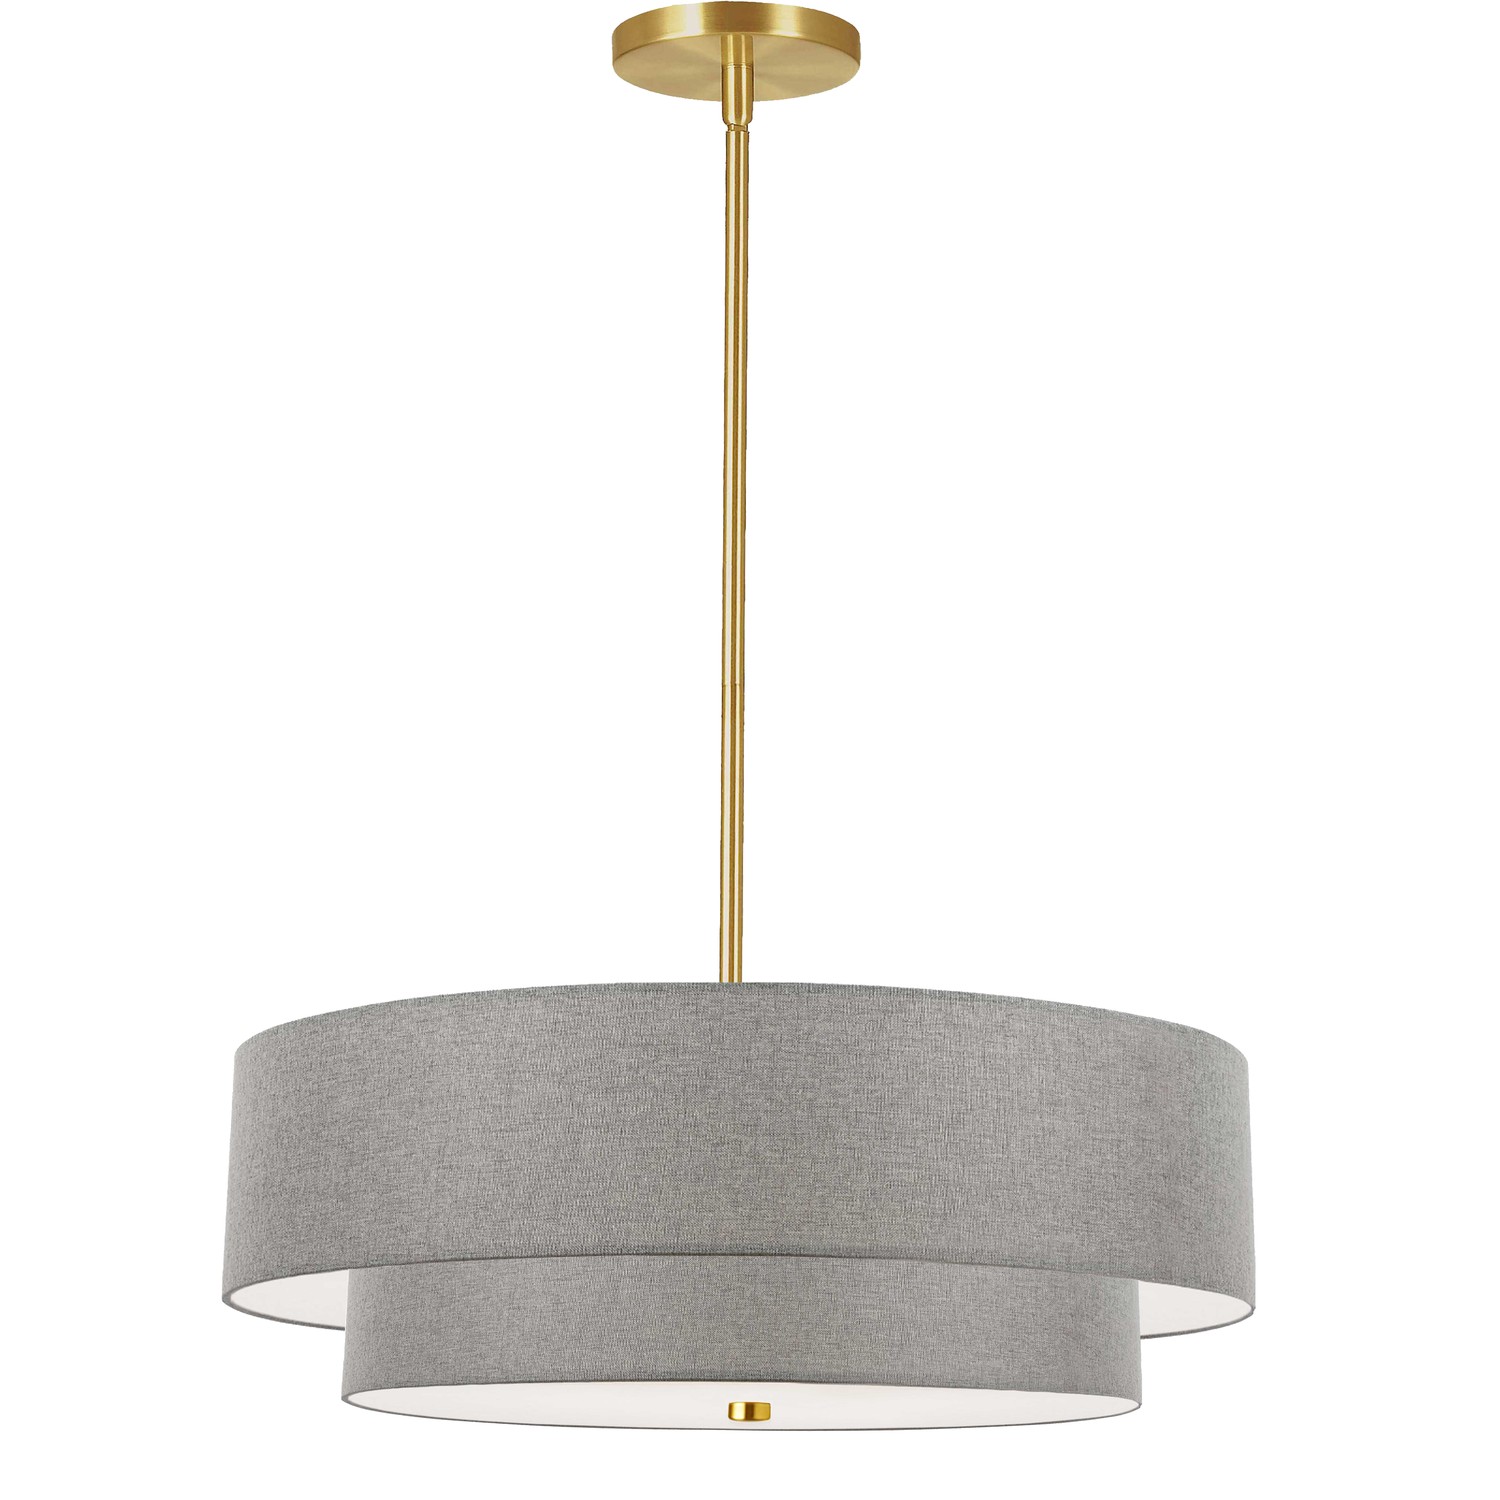 4 Light Incandescent 2 Tier Pendant, Aged Brass with Grey Shade